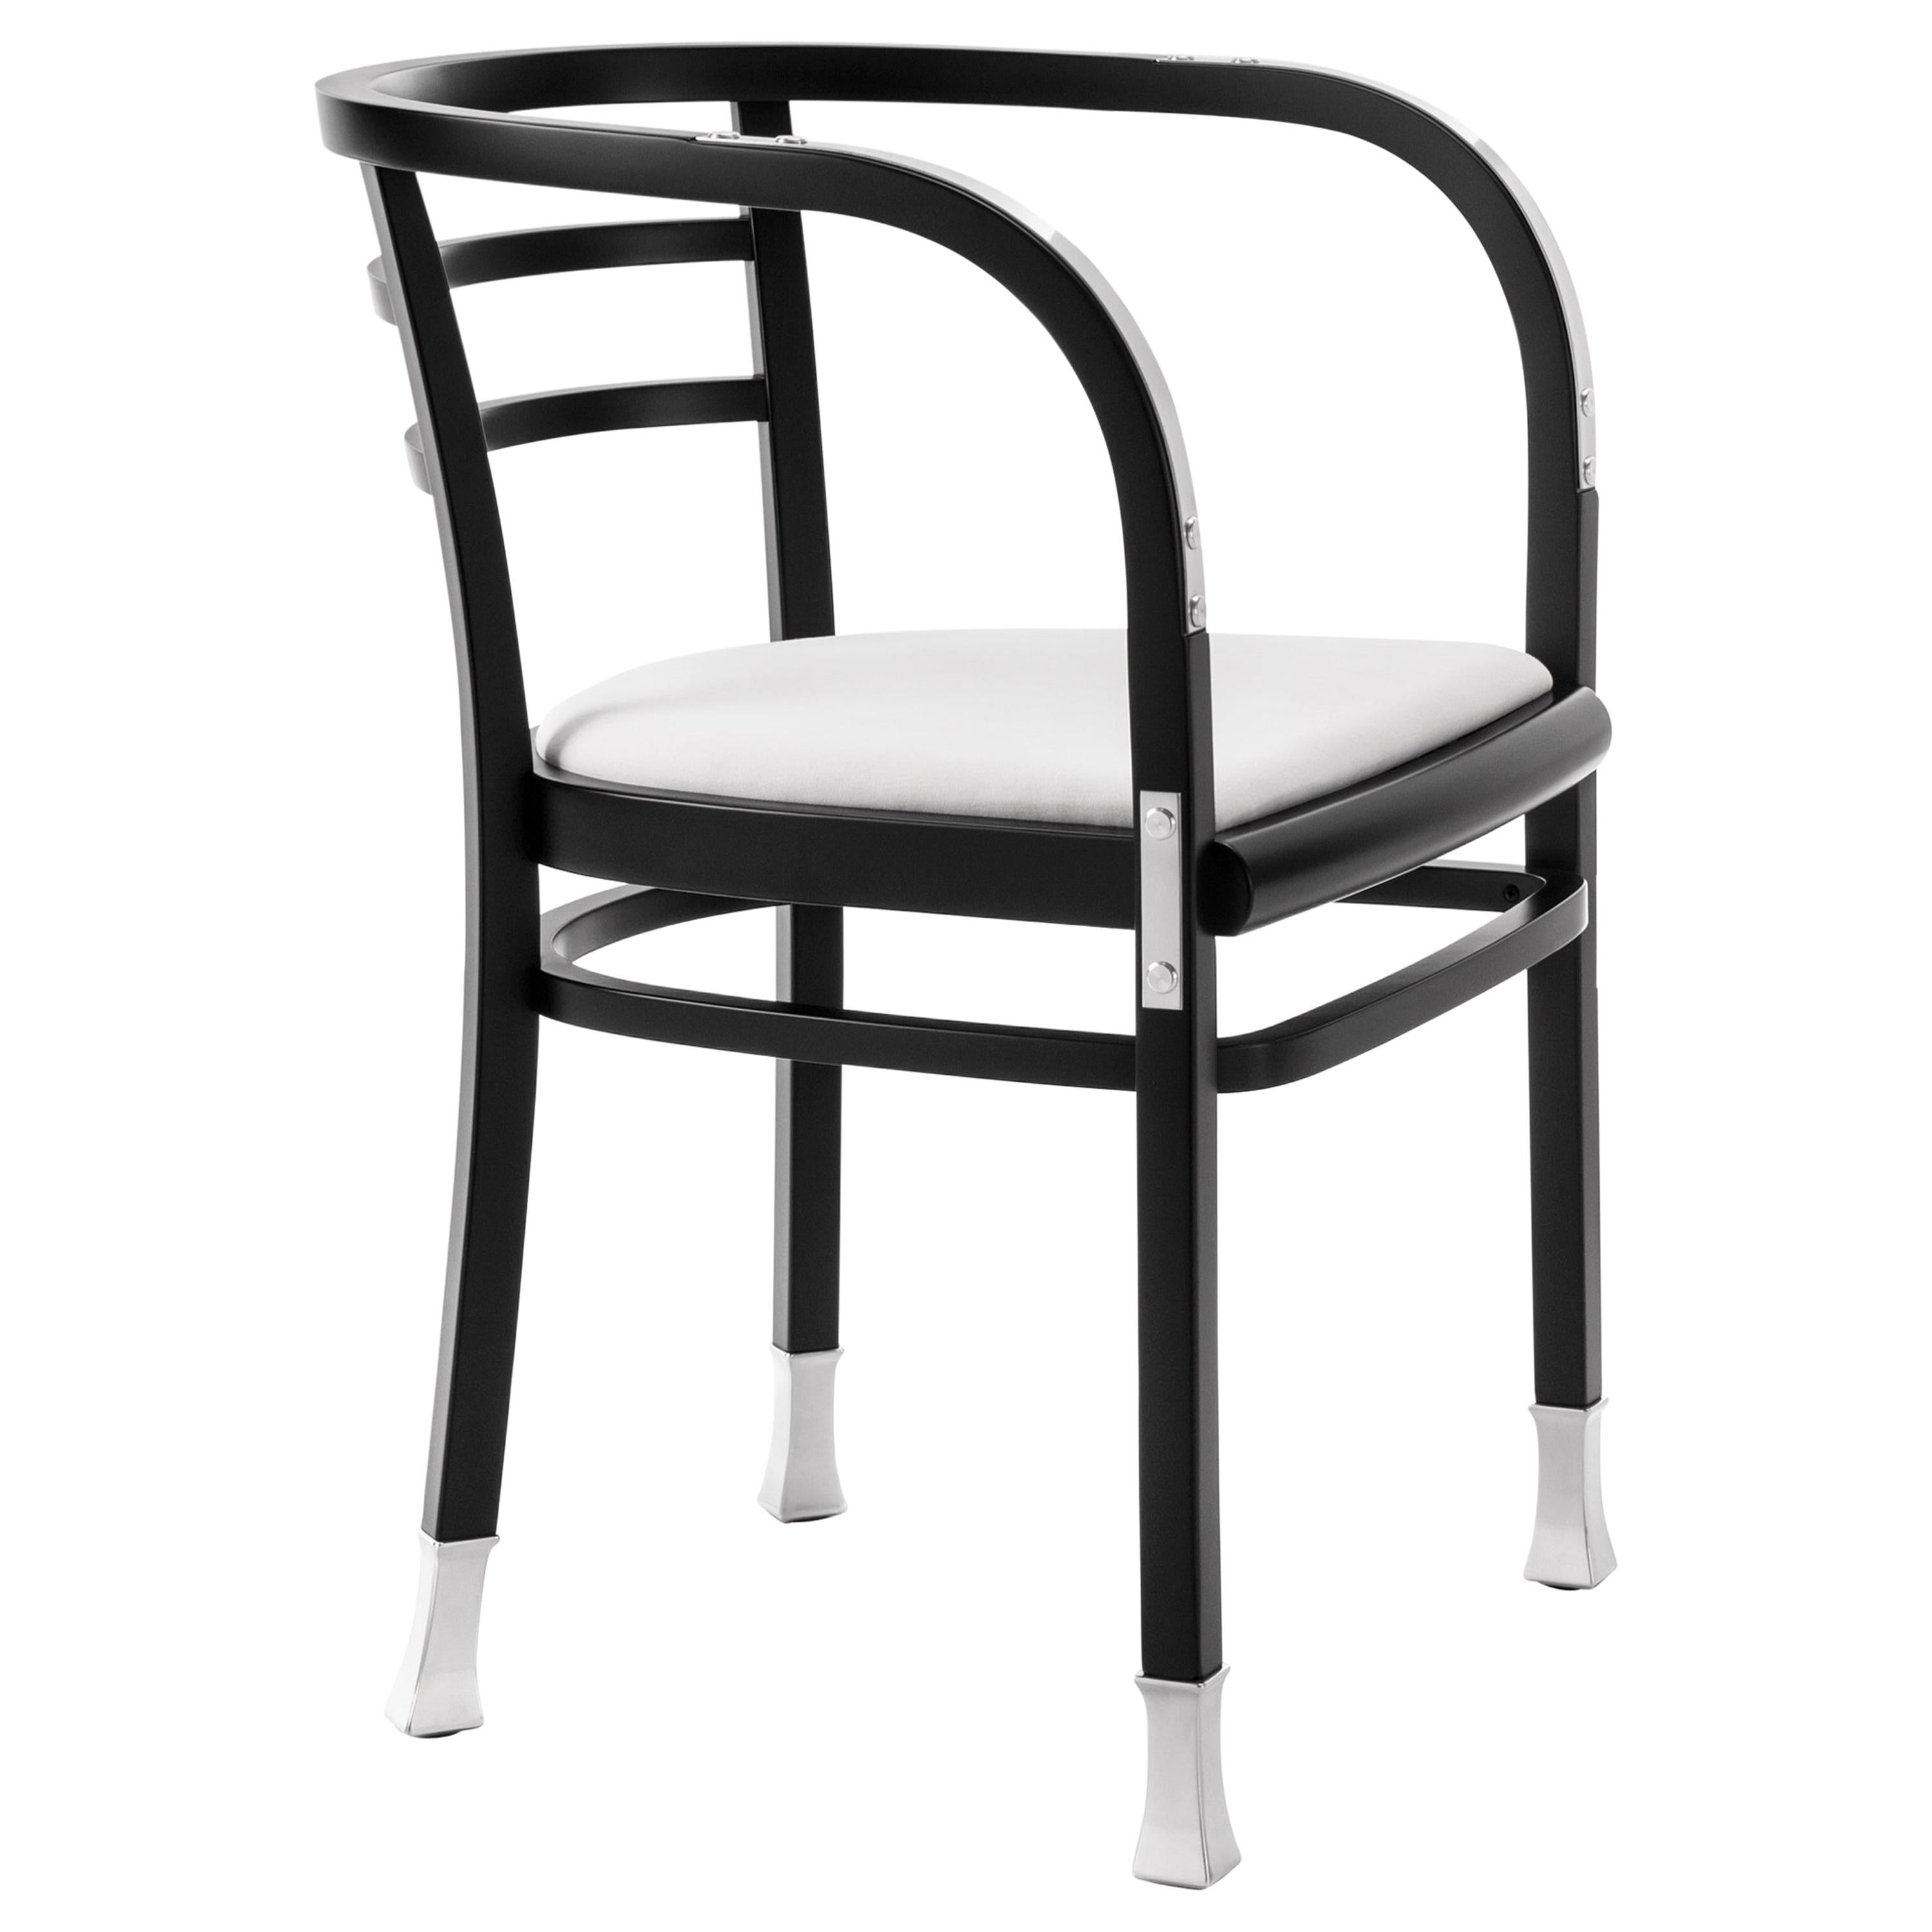 Otto Wagner Chairs